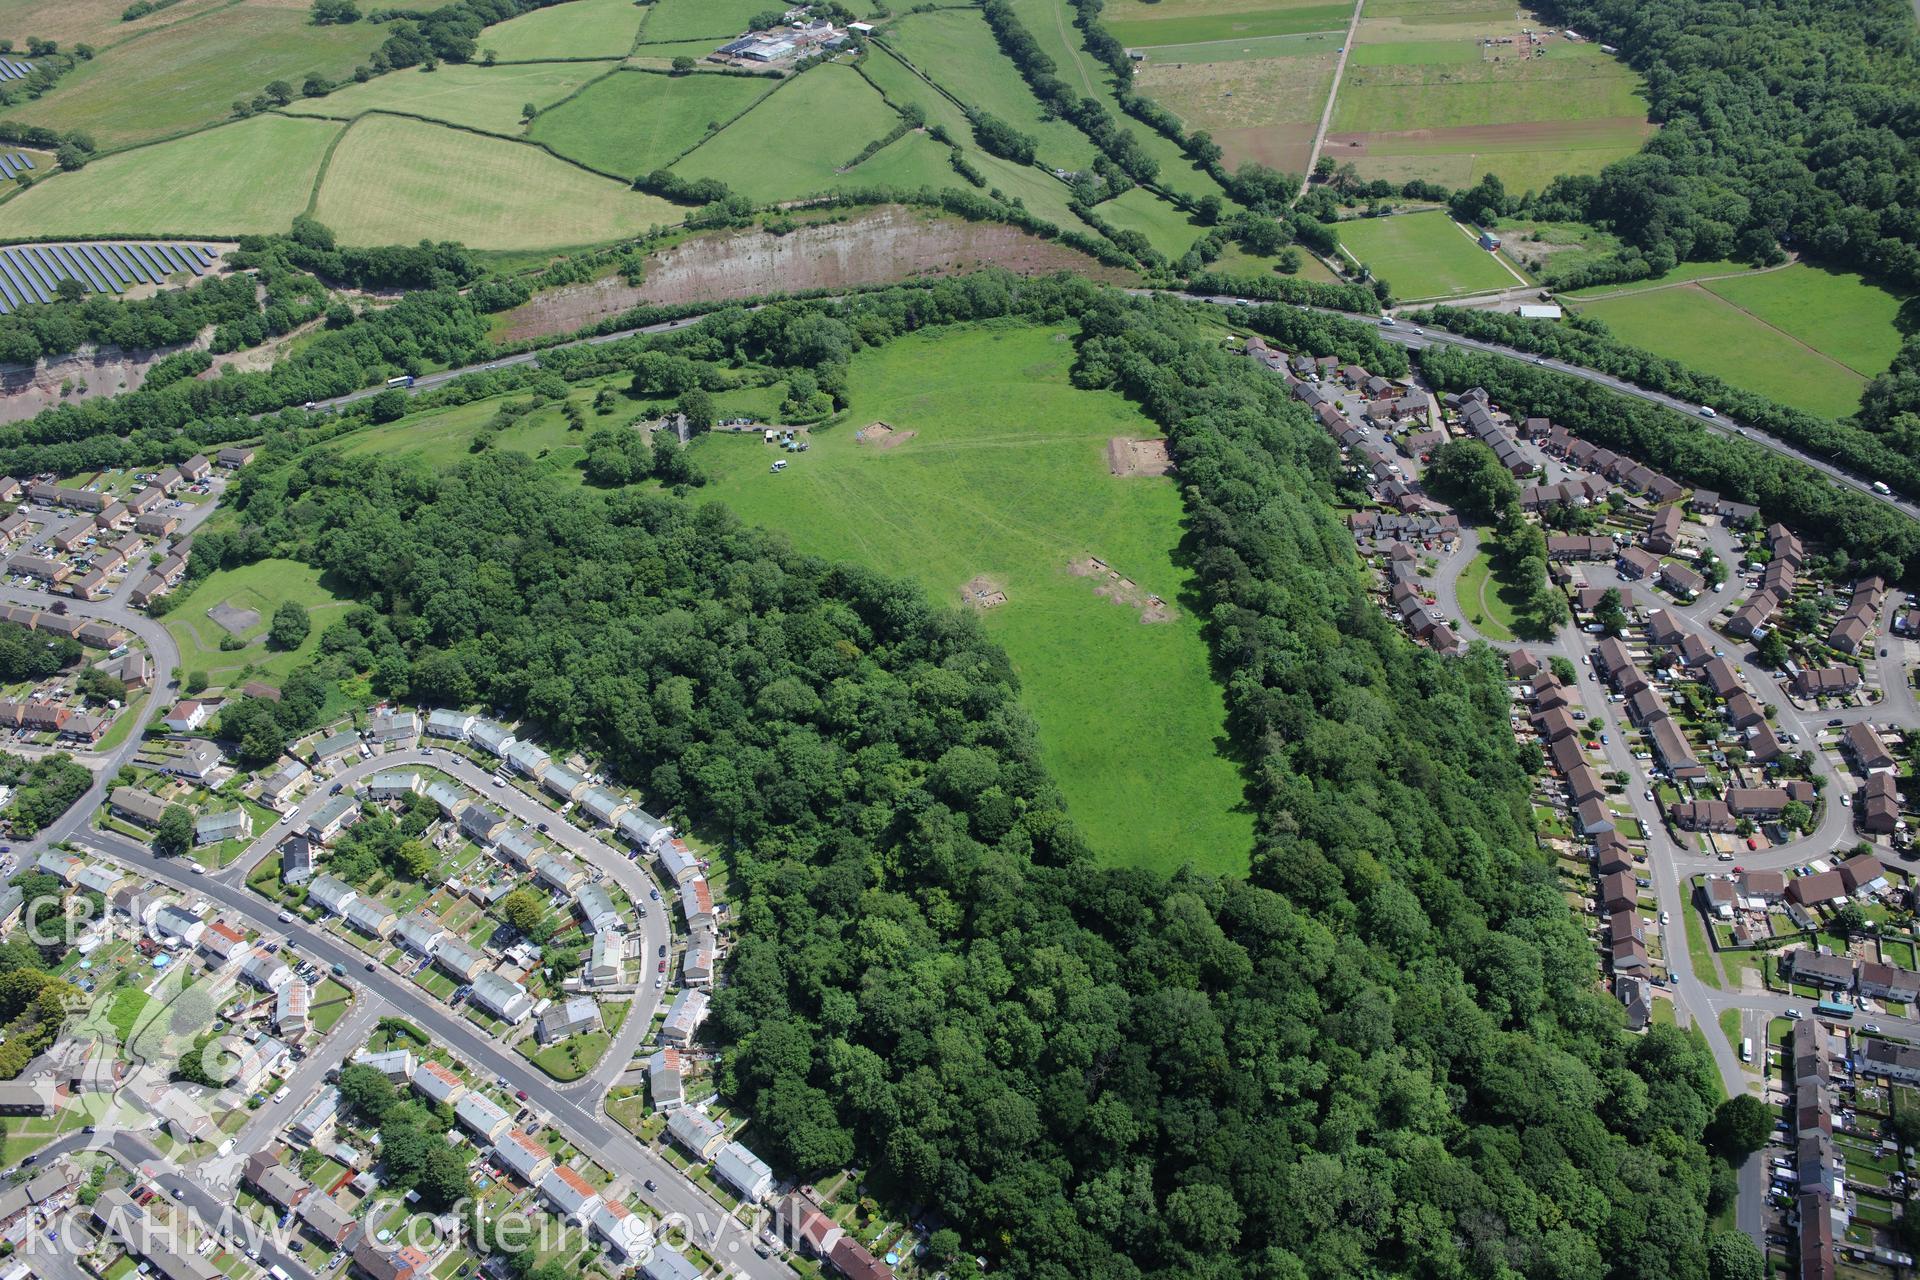 Caerau village and the excavation of Caerau Hillfort, Ely, conducted by Cardiff University. Oblique aerial photograph taken during the Royal Commission's programme of archaeological aerial reconnaissance by Toby Driver on 29th June 2015.